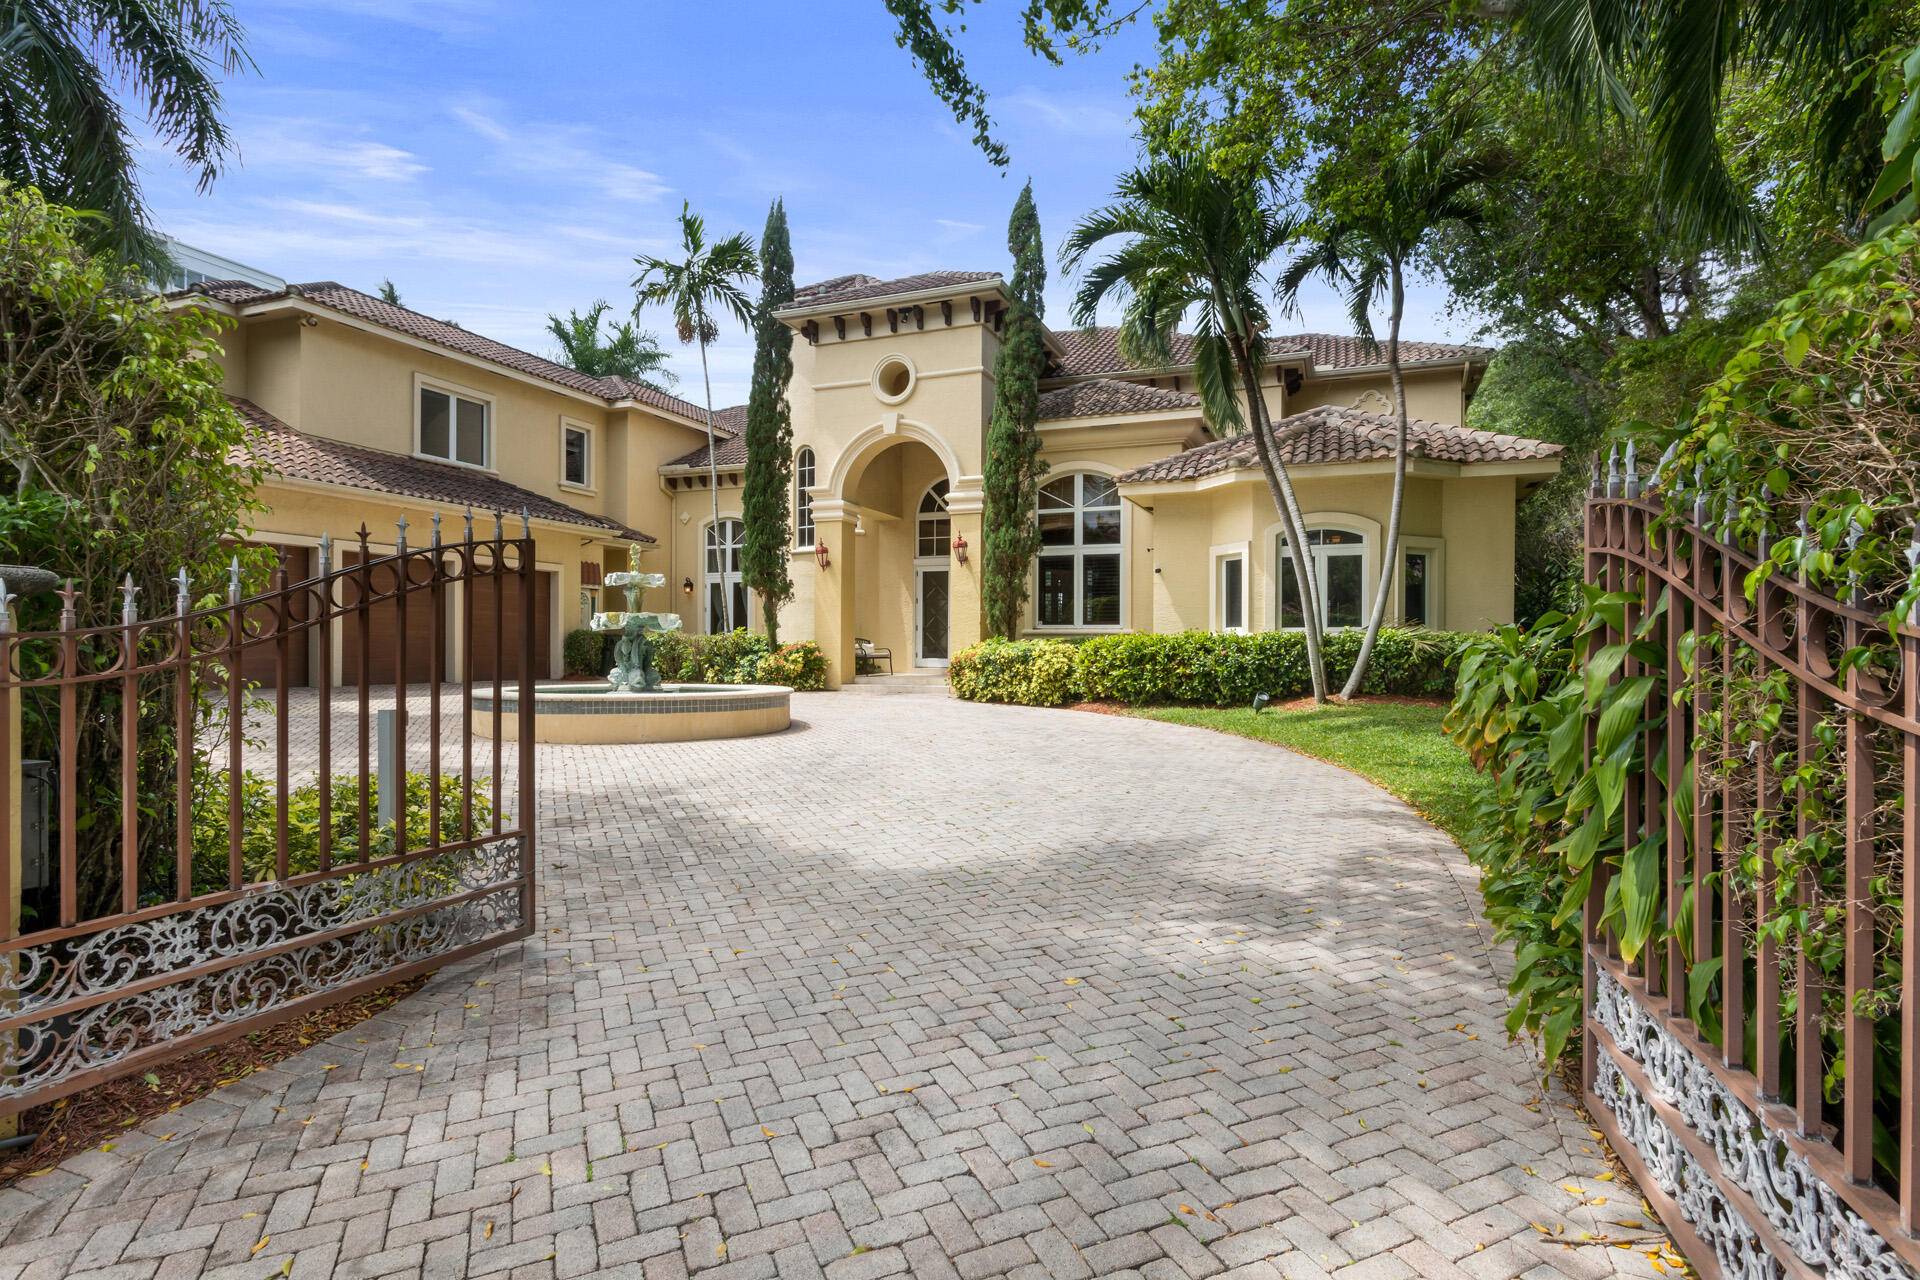 Direct Intracoastal estate, the closest Intracoastal property to Atlantic Avenue, offers easy access to Delray's vibrant shops and restaurants, along with the beauty and privacy of a well established beachside ...